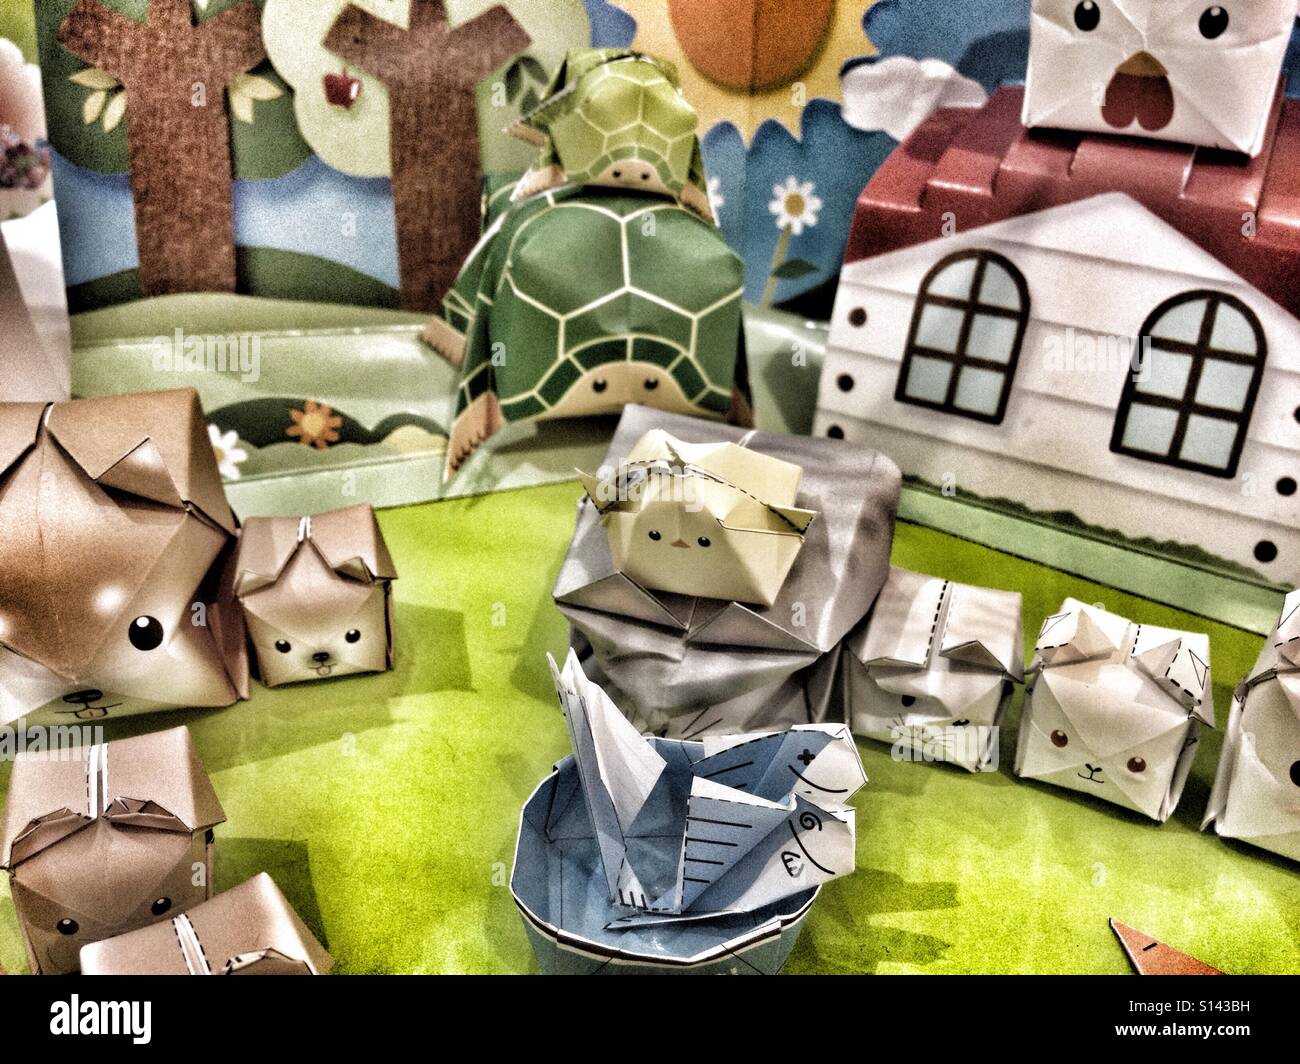 Handmade Origami Animals, Paper Dogs, Cats, Turtles, Chickens - Cube Crafted Origami Trees, House & Background Stock Photo